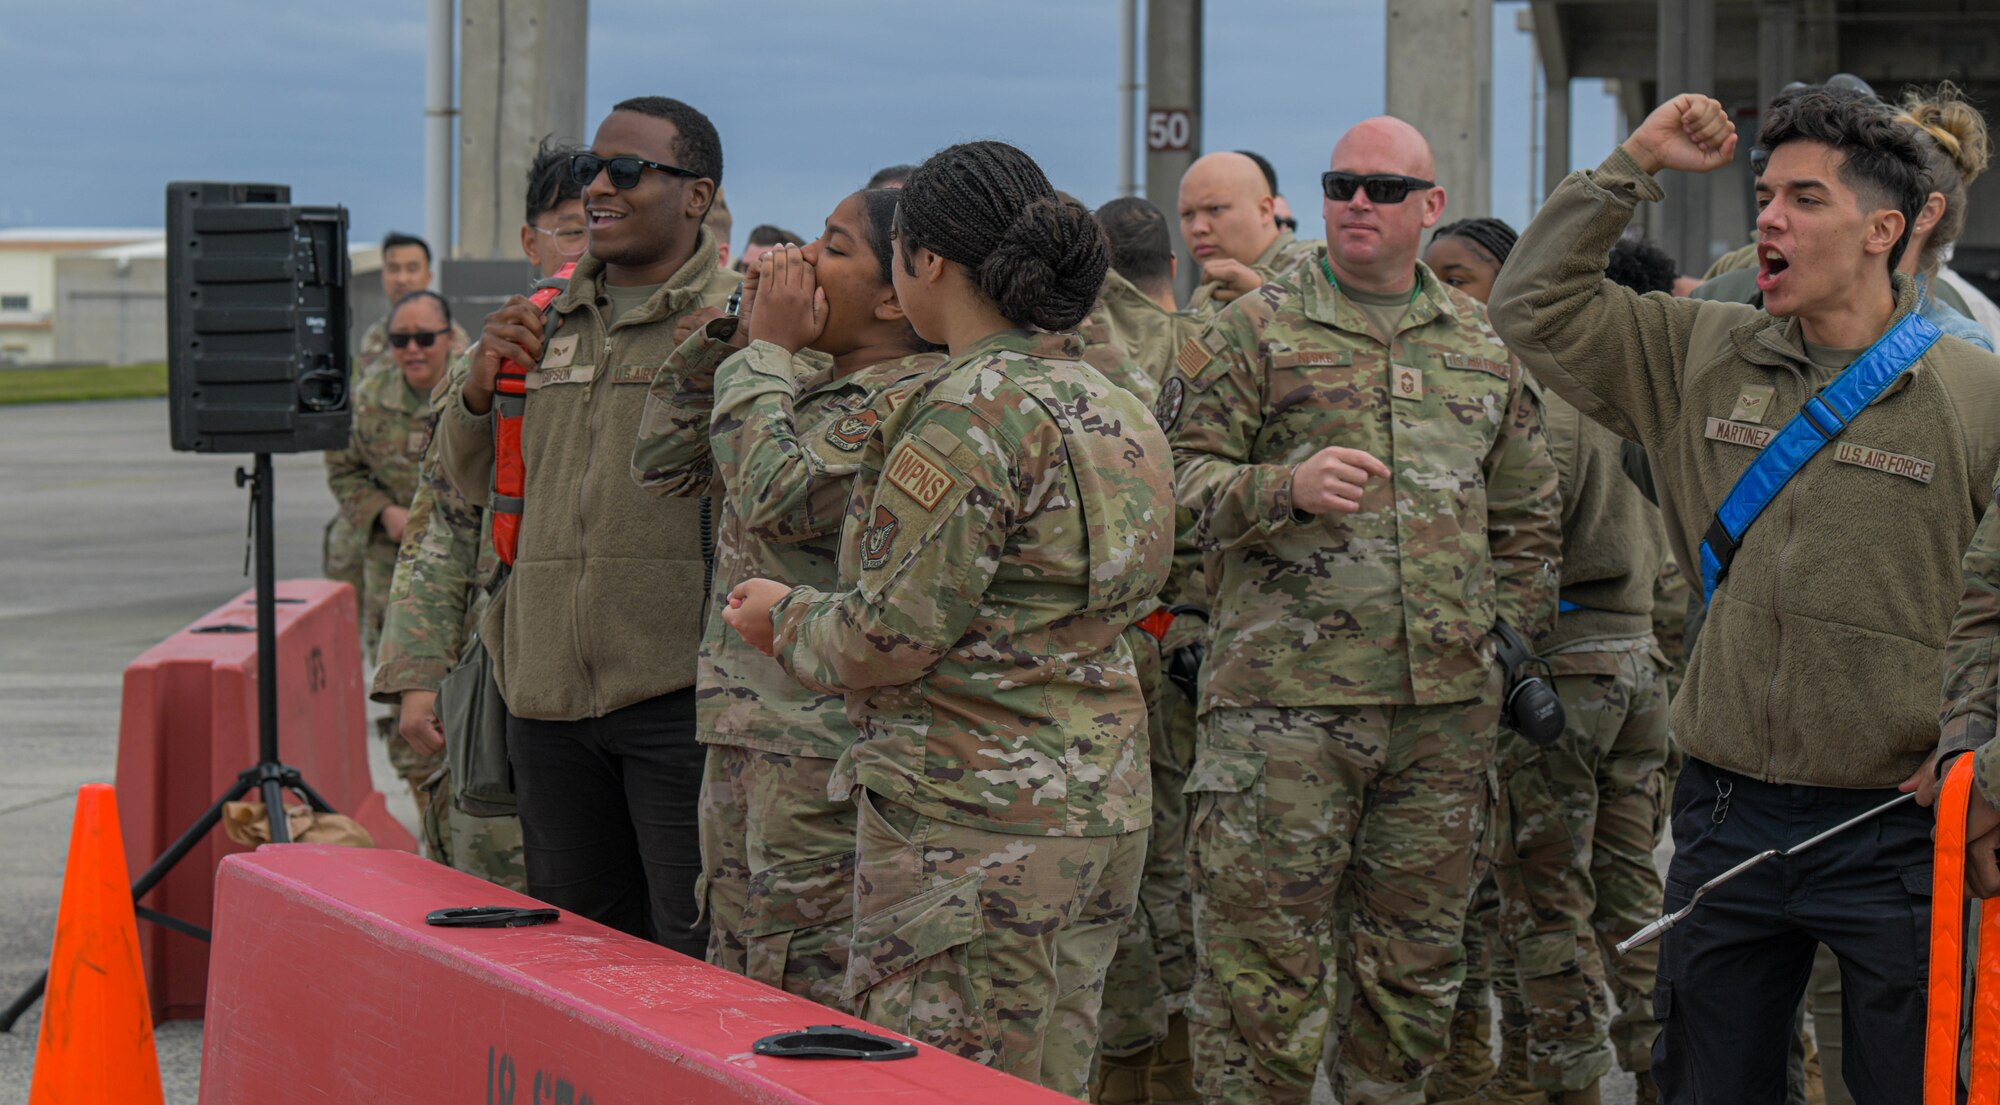 airmen crowded together to watch competition